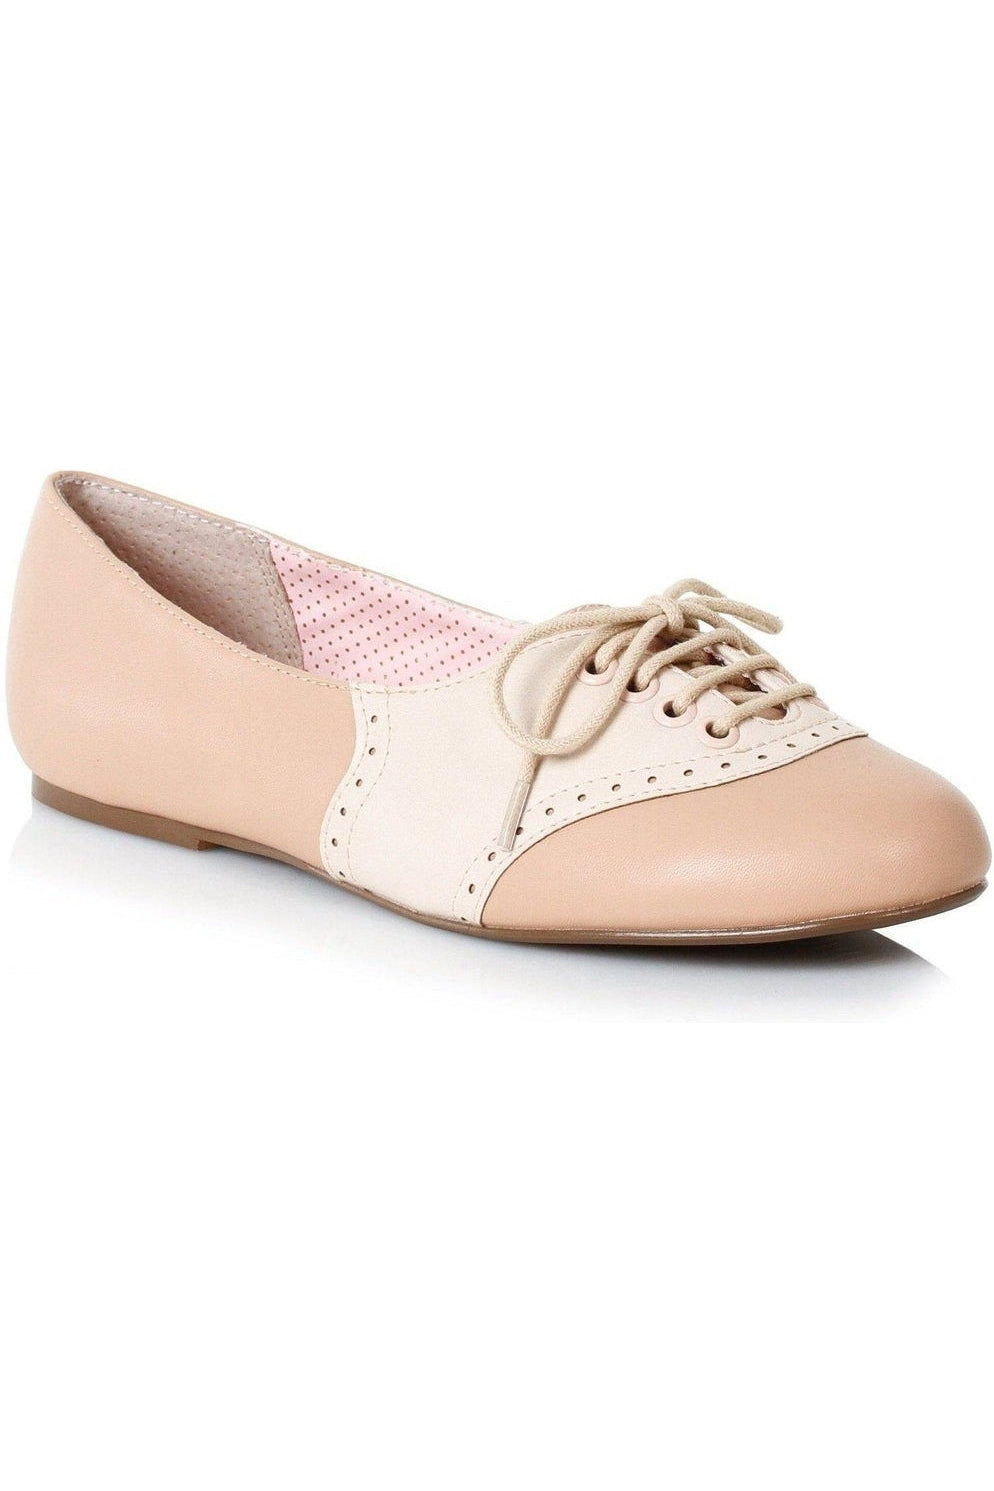 Bettie Paige Halle Oxford Flat | Nude Faux Leather-Bettie Page by Ellie-SEXYSHOES.COM